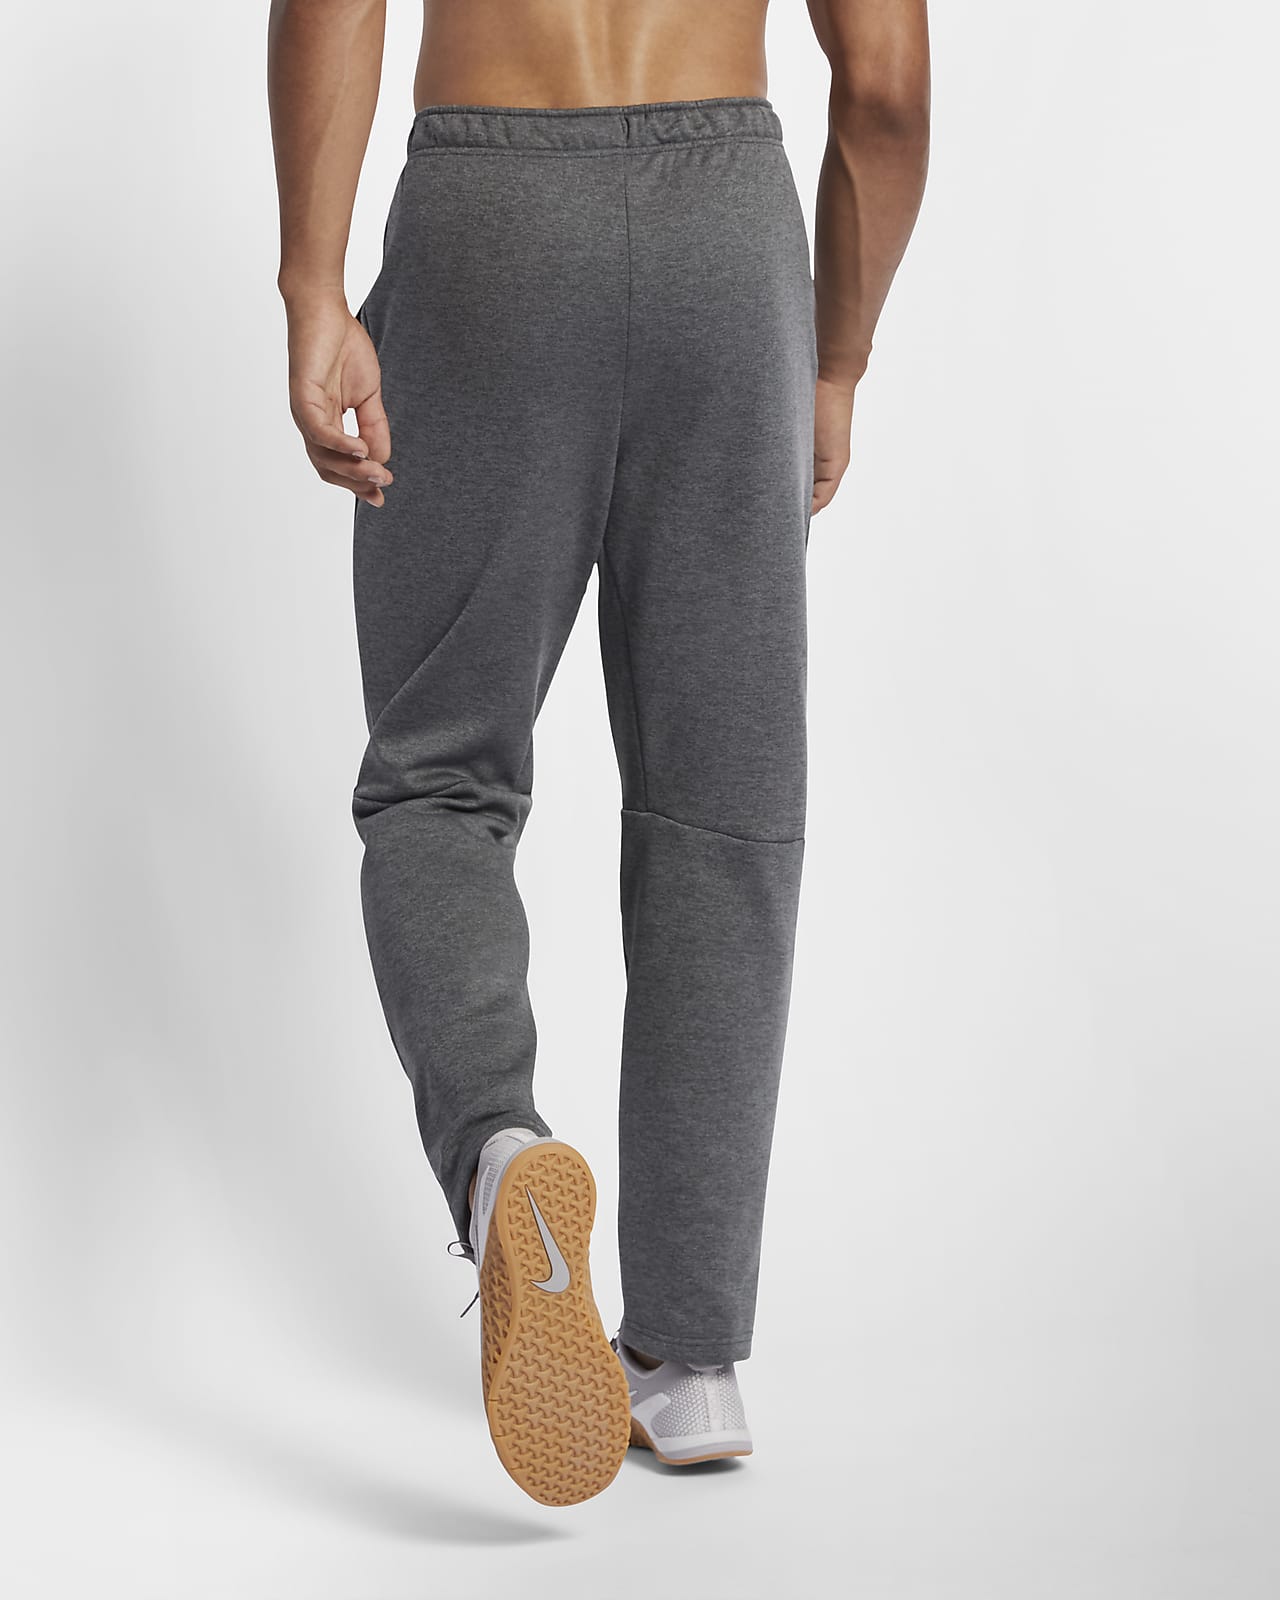 nike therma men's tapered training trousers